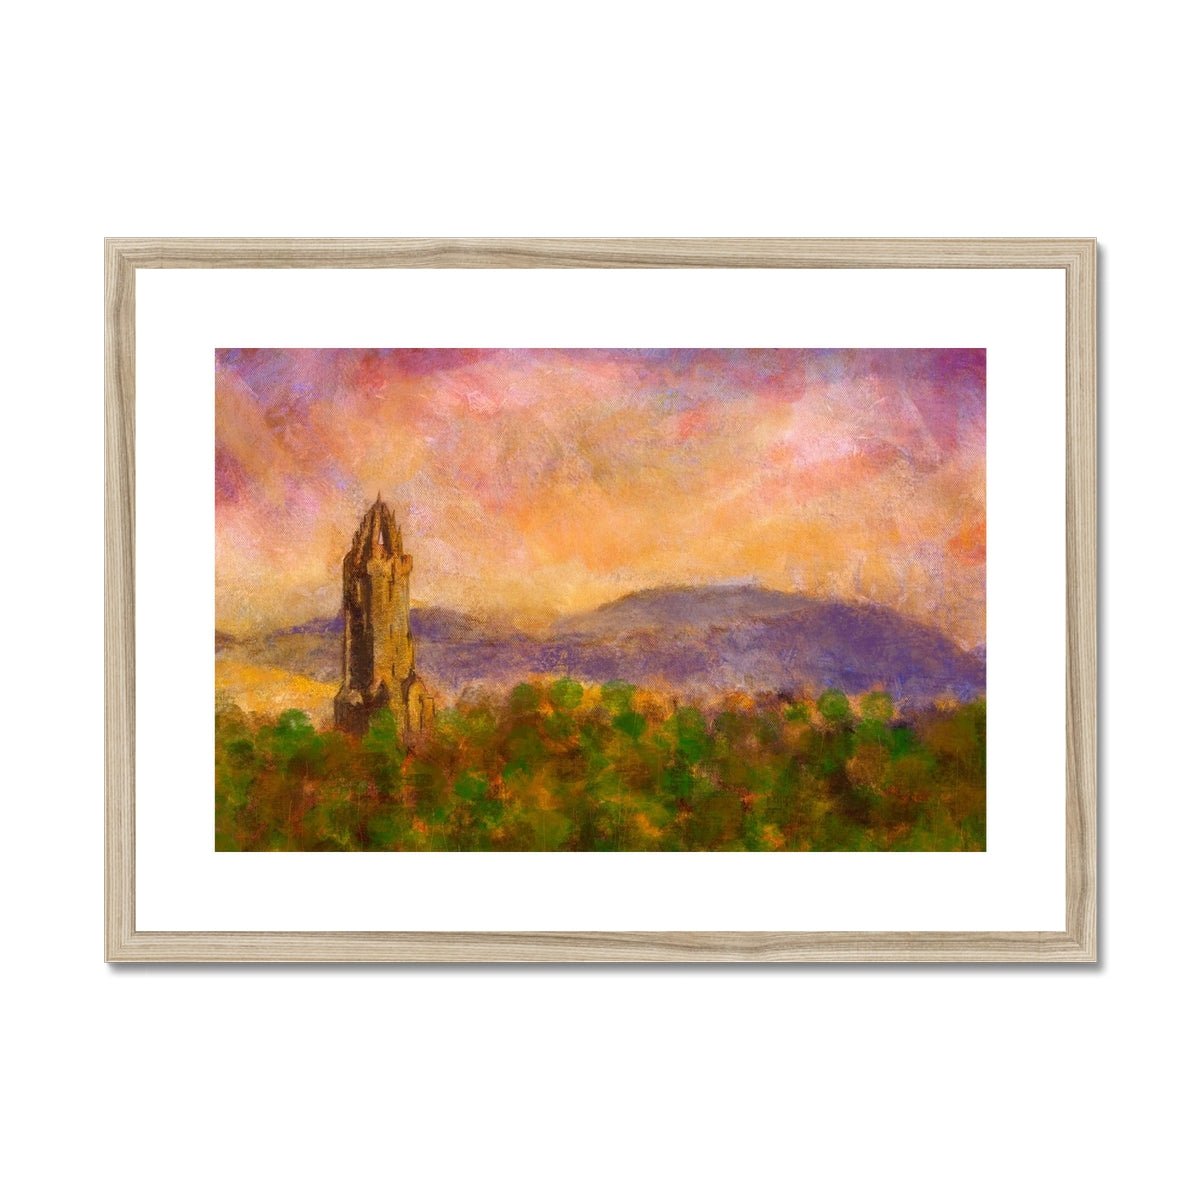 Wallace Monument Dusk Painting | Framed & Mounted Prints From Scotland-Framed & Mounted Prints-Historic & Iconic Scotland Art Gallery-A2 Landscape-Natural Frame-Paintings, Prints, Homeware, Art Gifts From Scotland By Scottish Artist Kevin Hunter